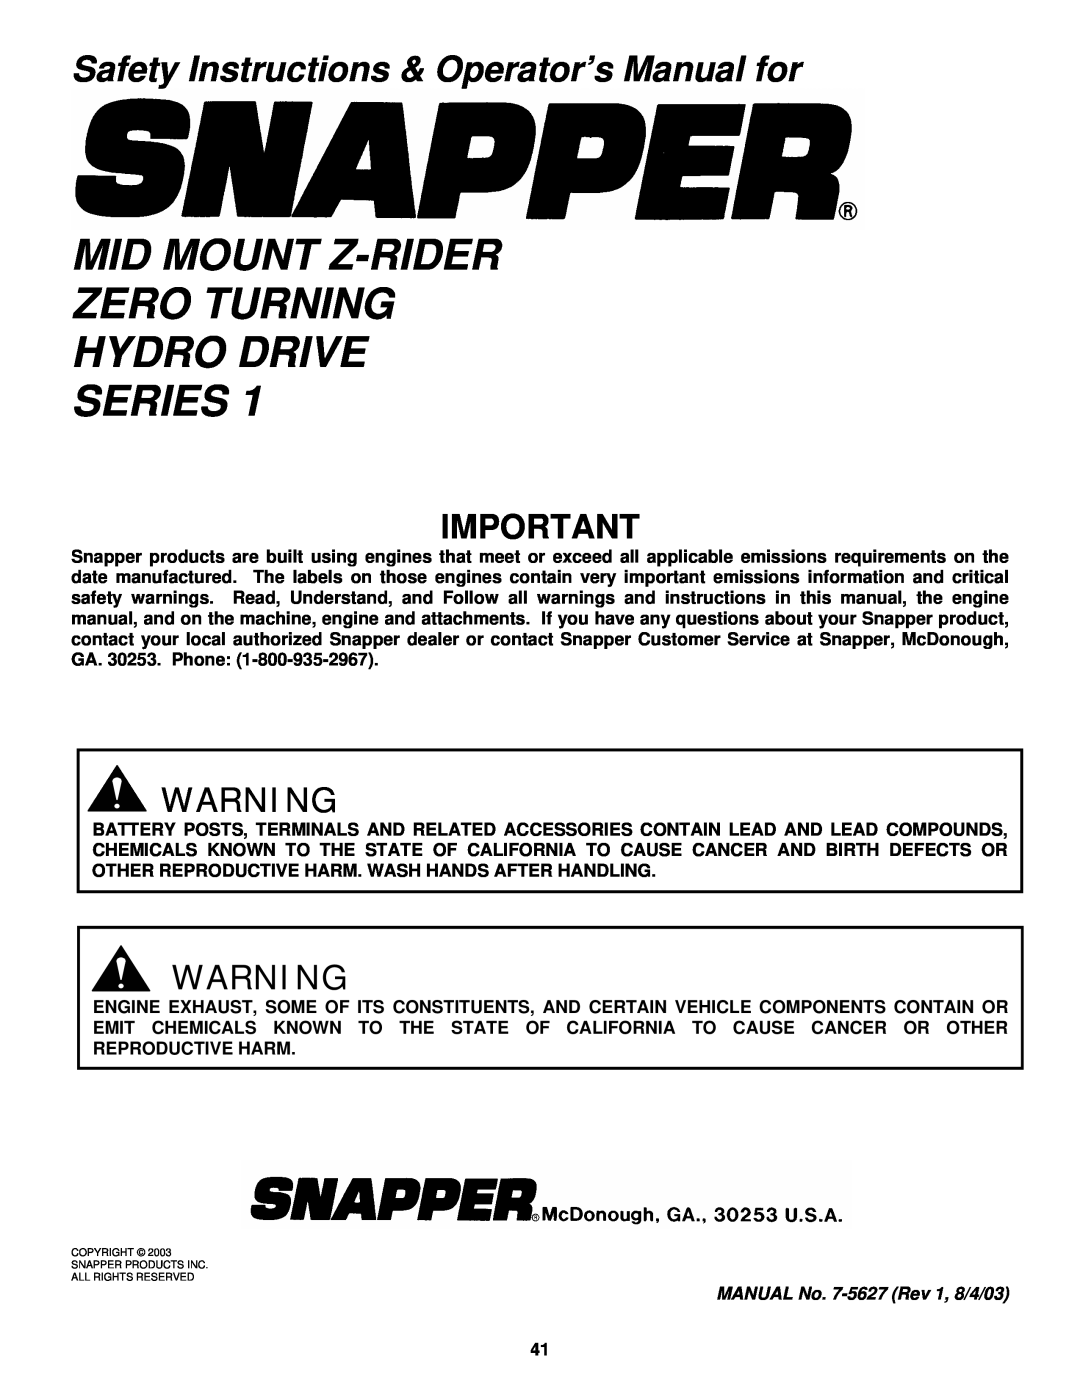 Snapper NZM19481KWV Mid Mount Z-Rider Zero Turning Hydro Drive Series, Safety Instructions & Operator’s Manual for 